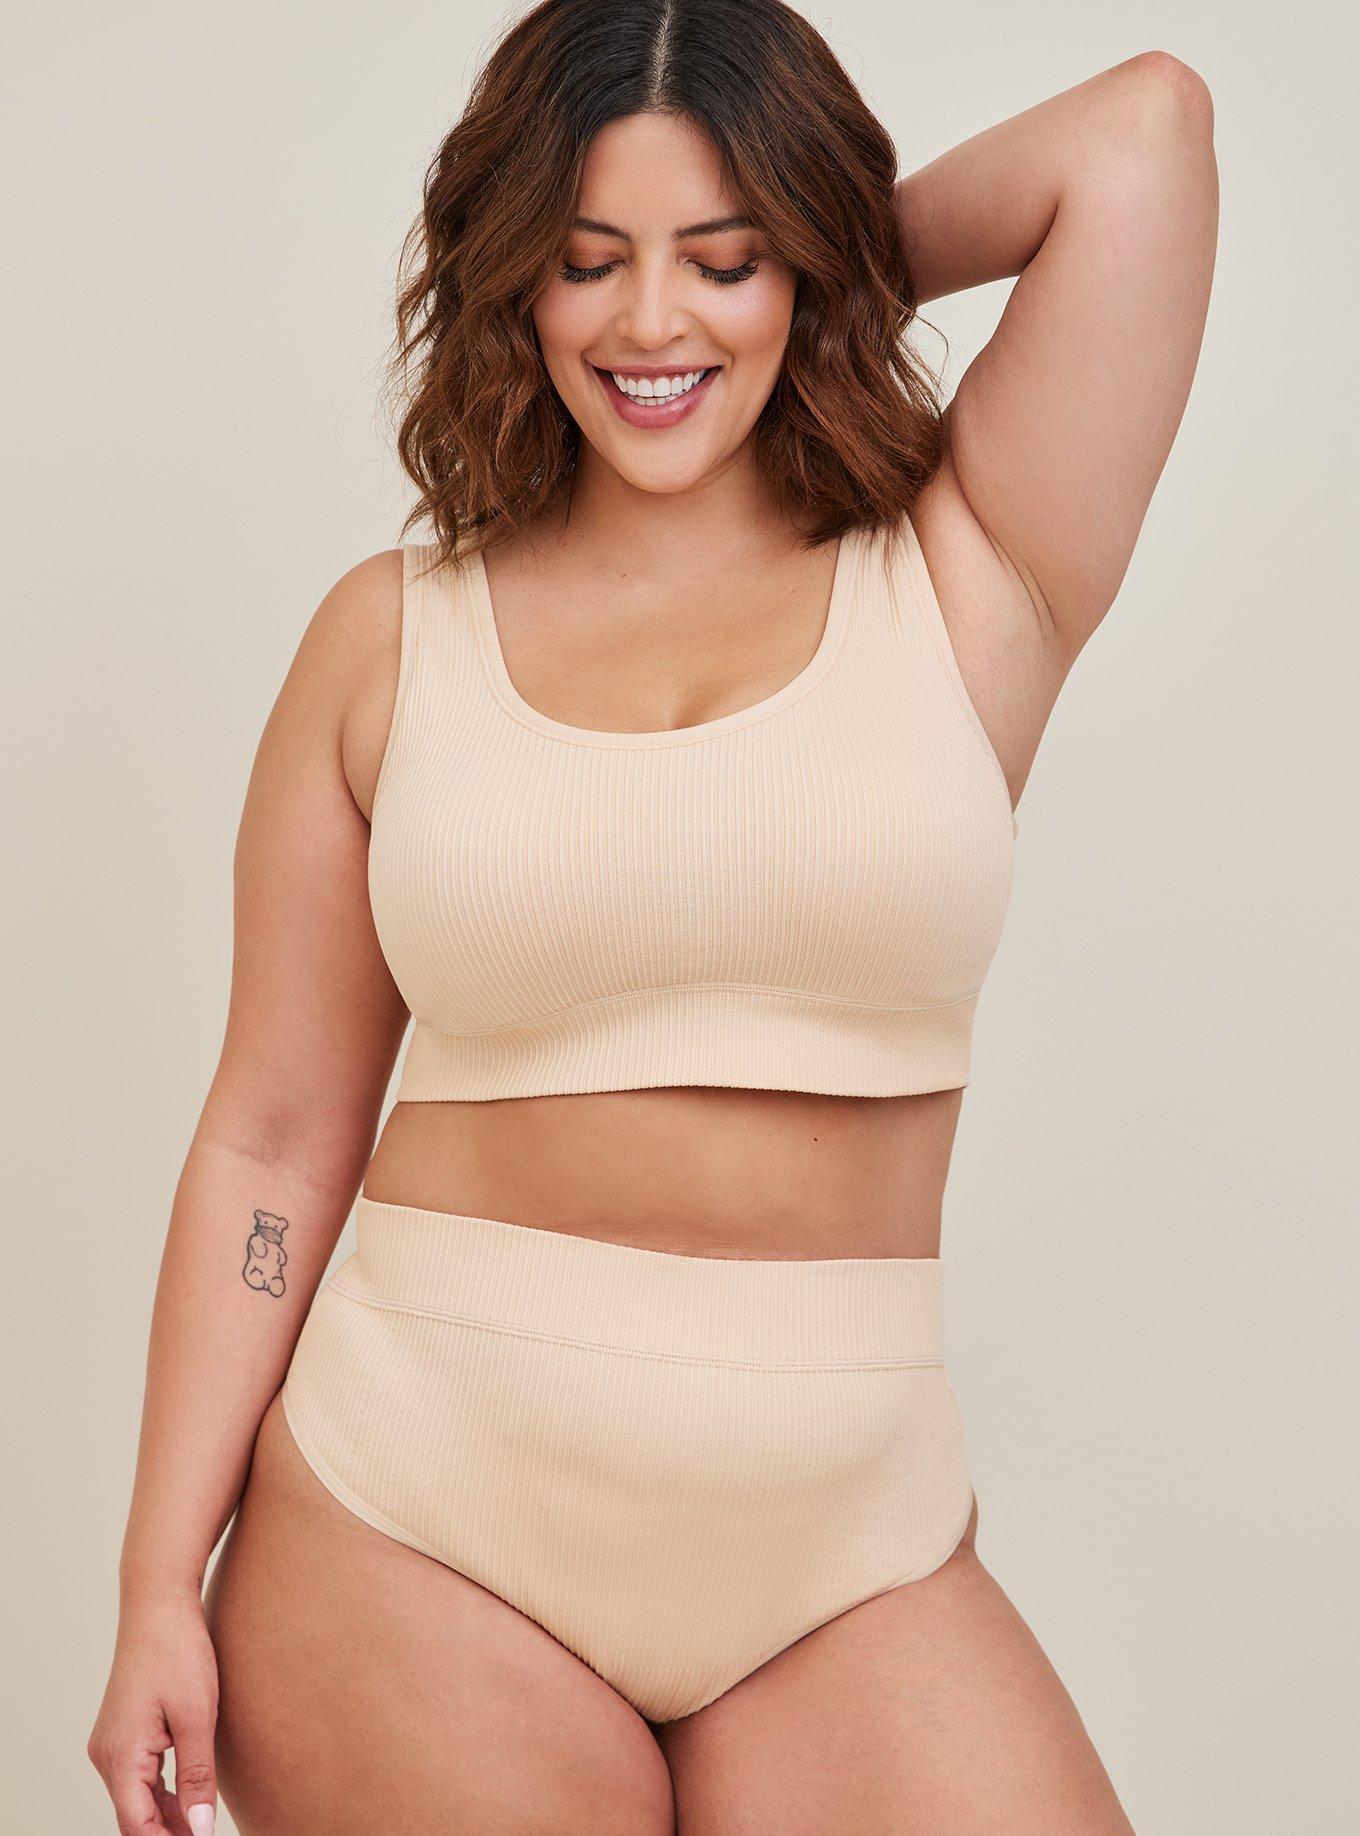 Has anyone tried this thong shaper? How uncomfortable was it? : r/torrid